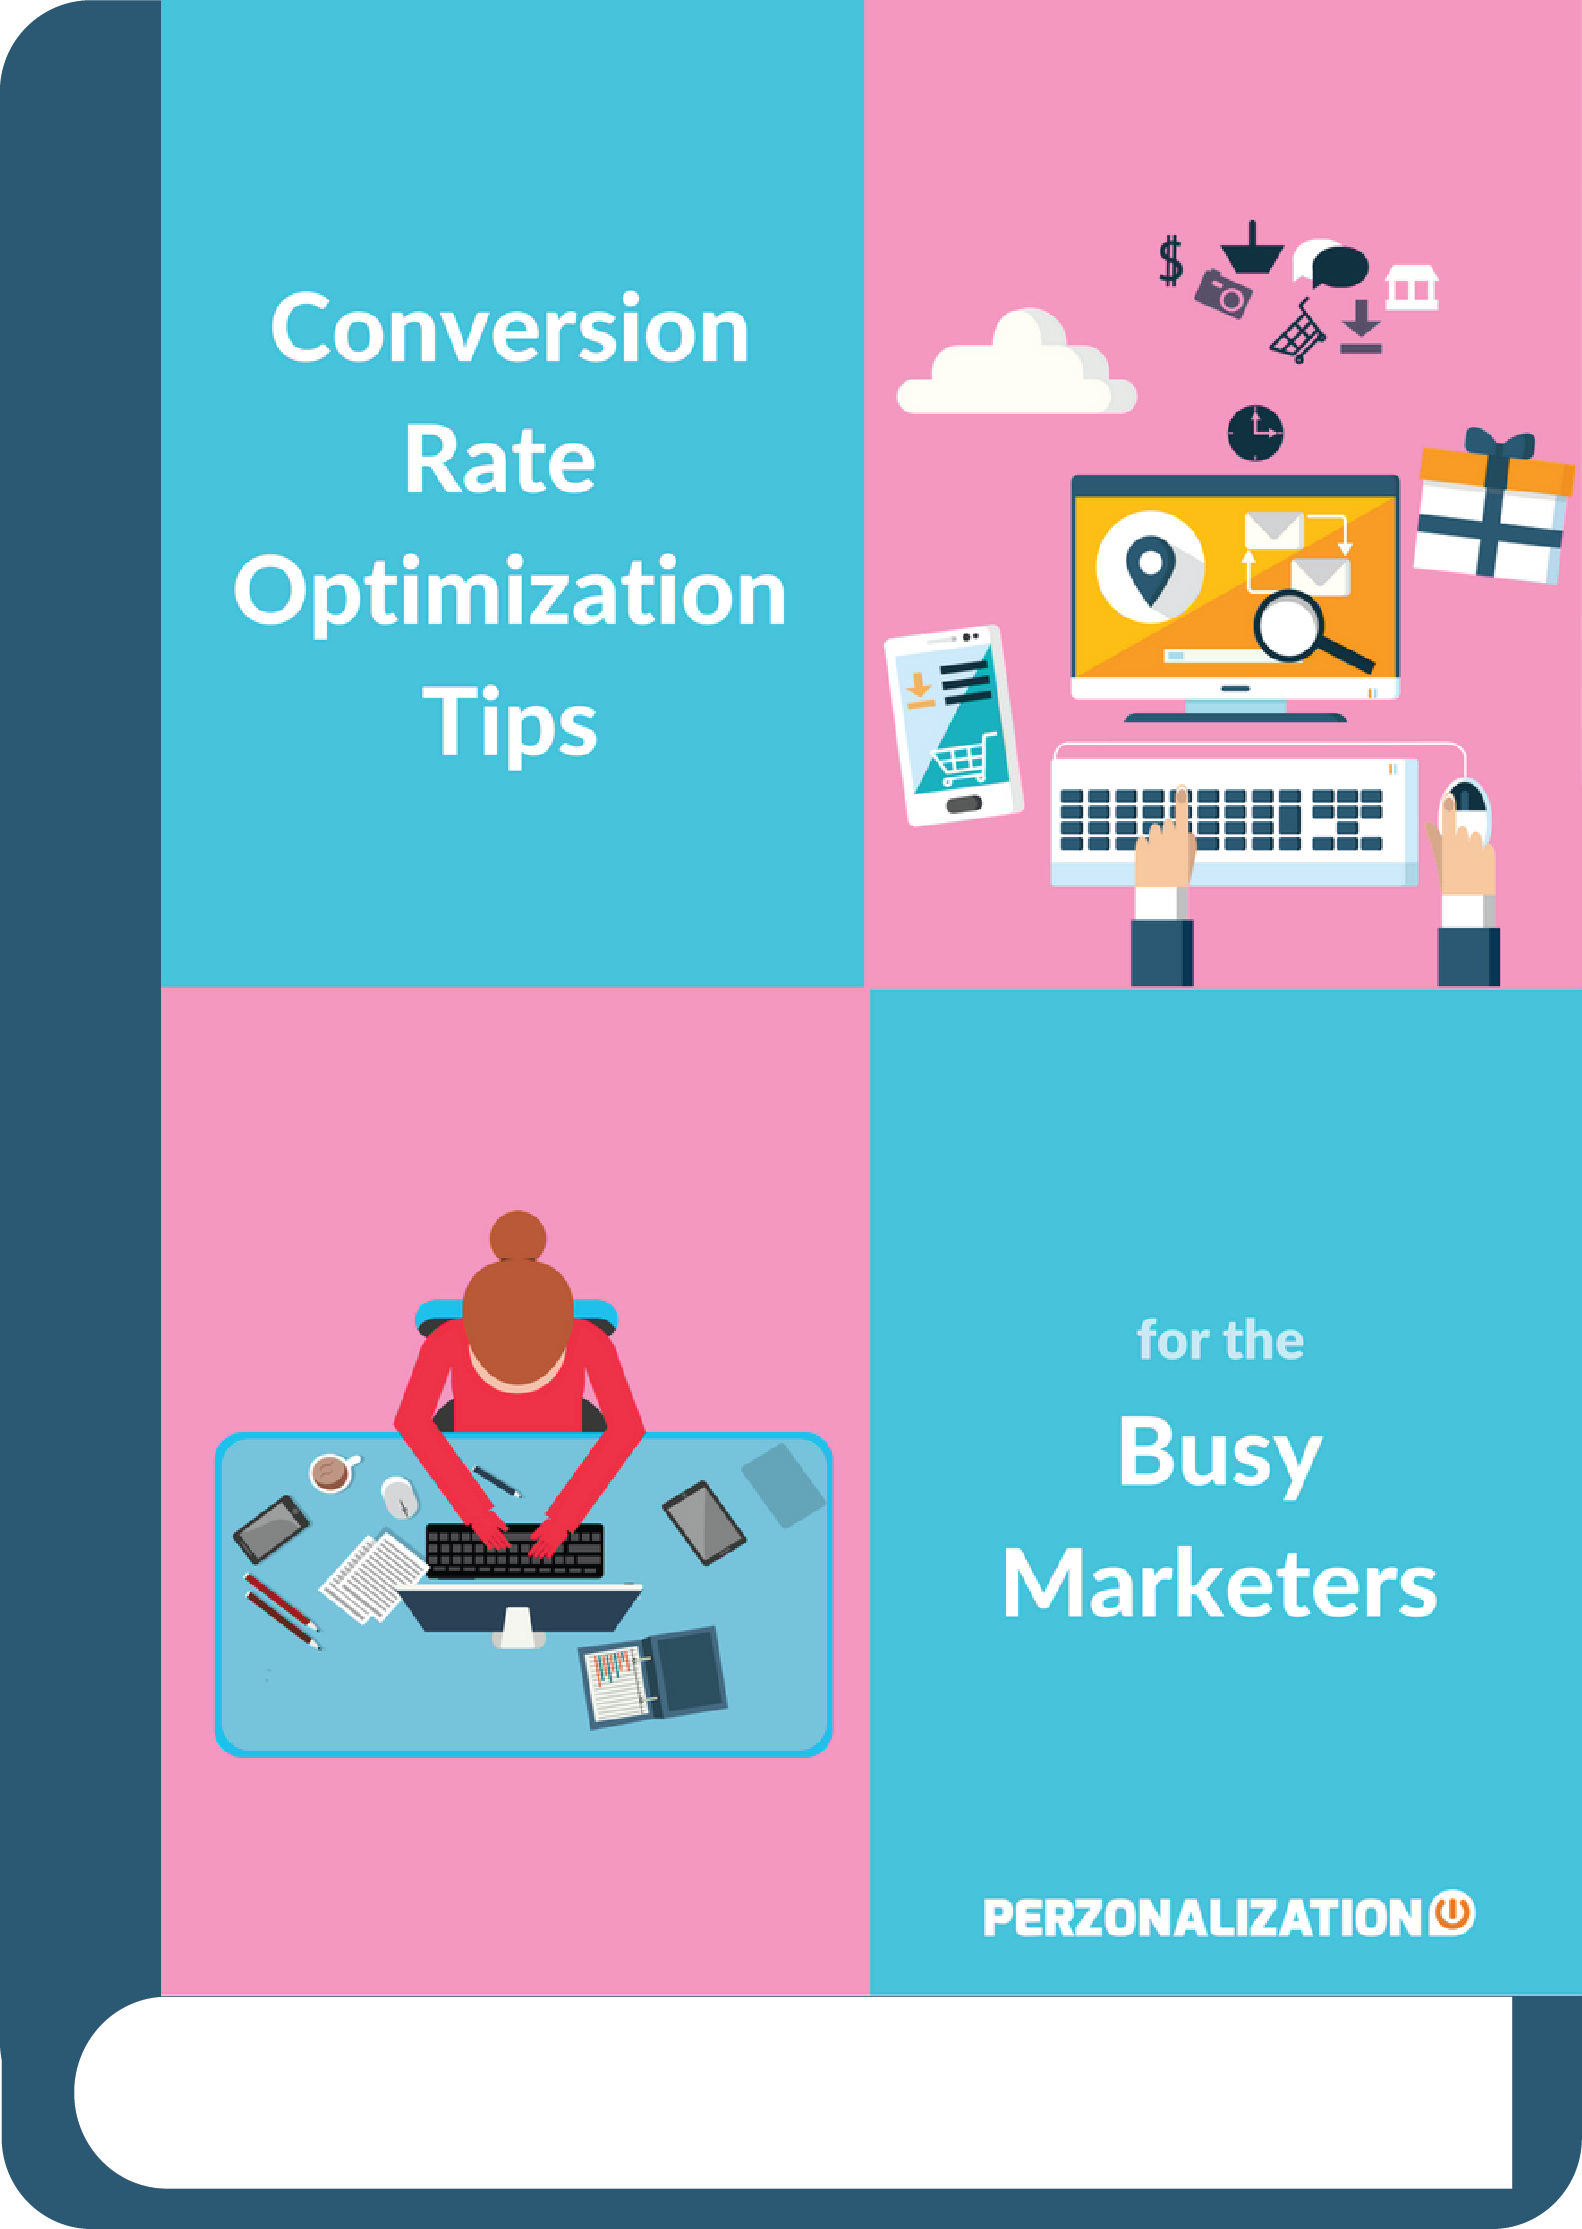 Is your eCommerce website attracting regular visitors? Then it's time to start focusing on Conversion Rate Optimization. Find out great tips for CRO!